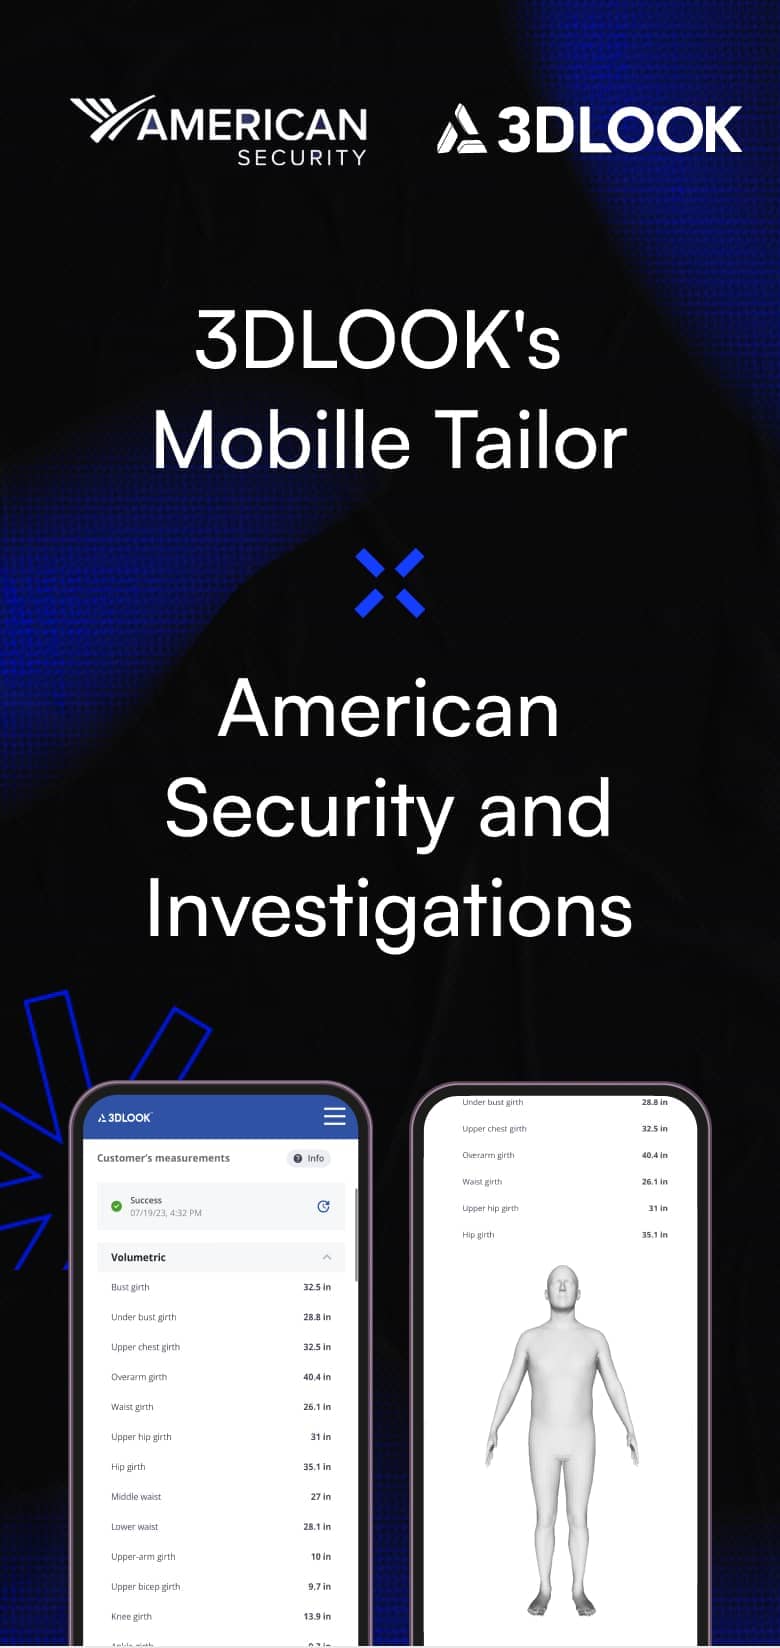 3dlook's mobile tailor ensures accurate uniform sizing for American security and investigations.